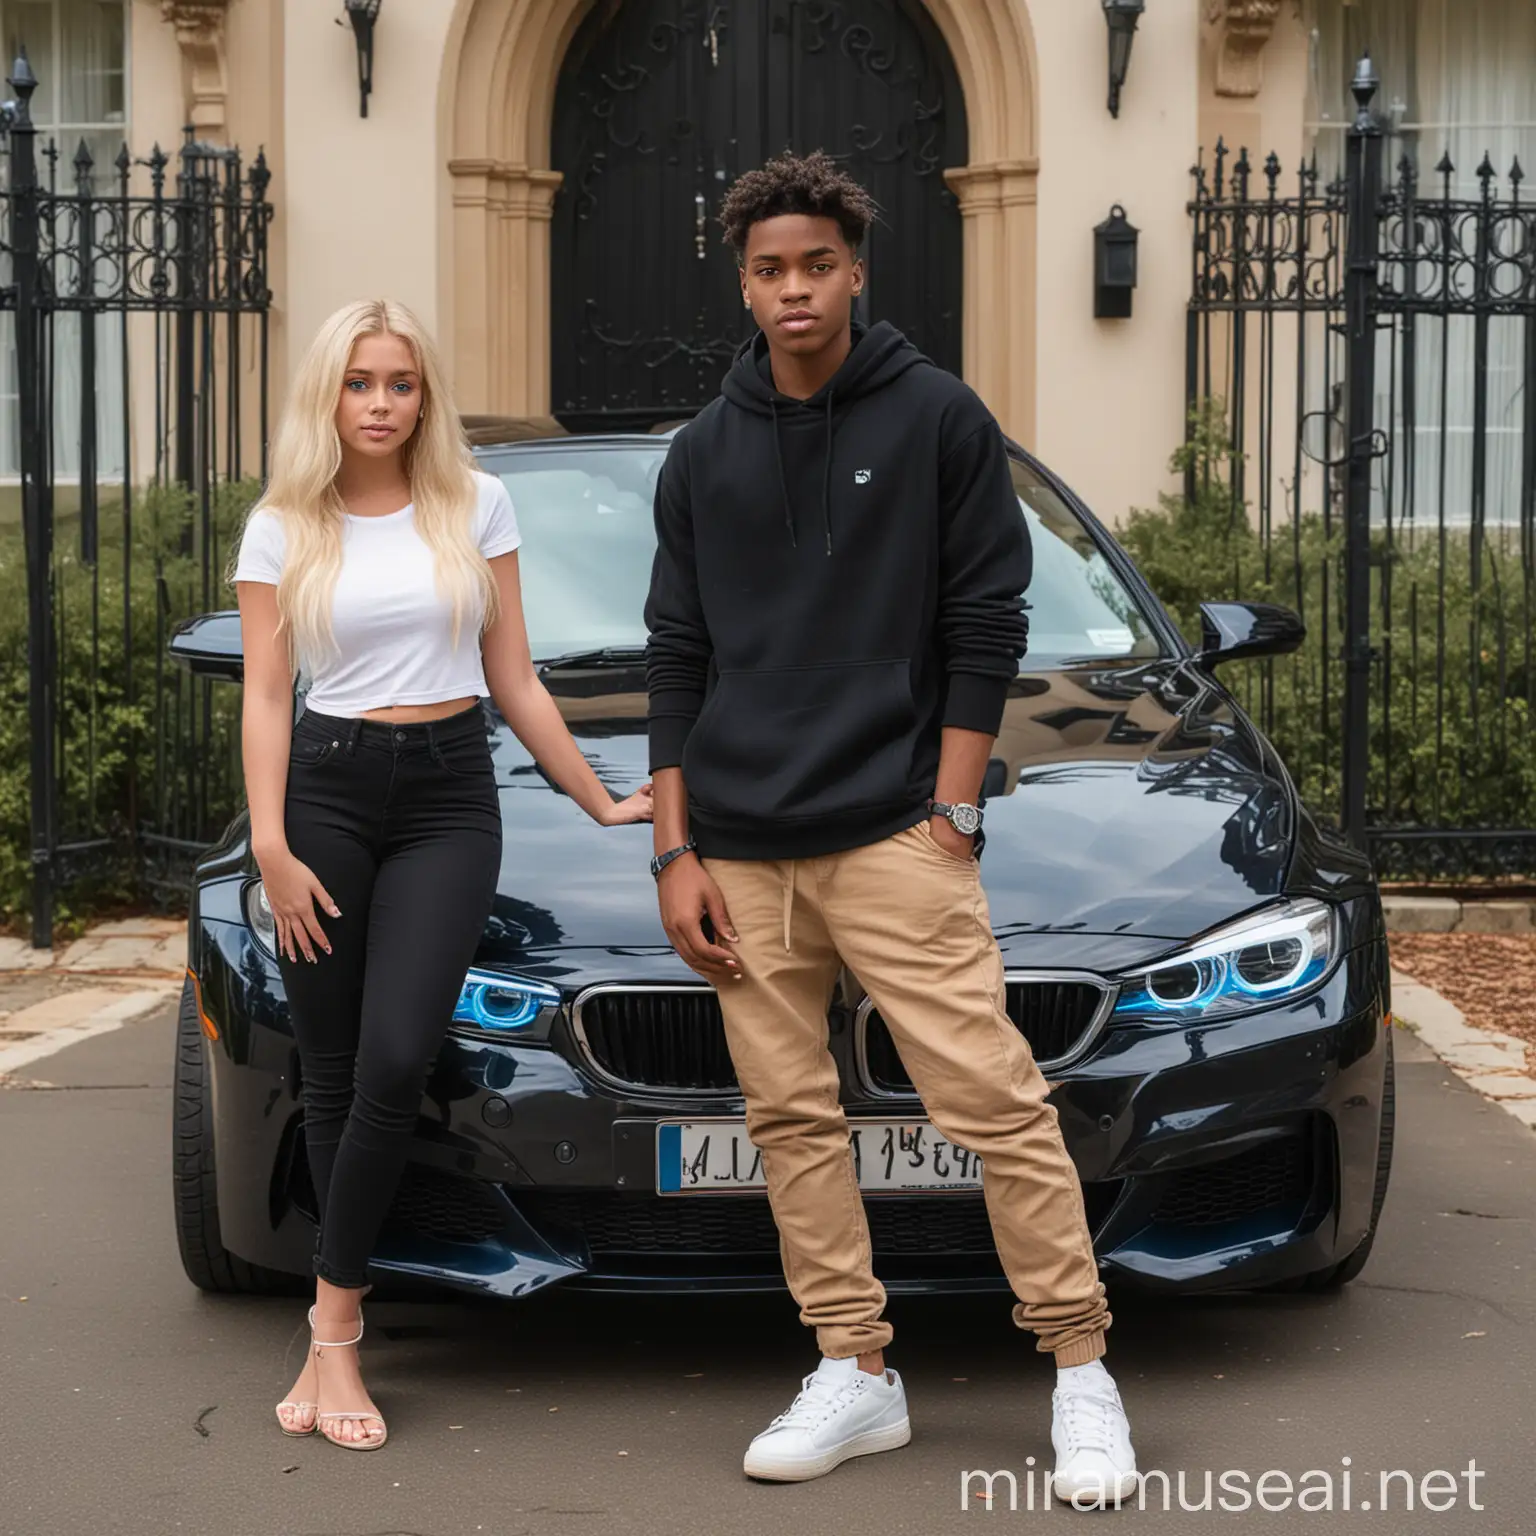 Affluent Black Teenage Male with BlondeHaired BlueEyed Girlfriend at Mansion Gate